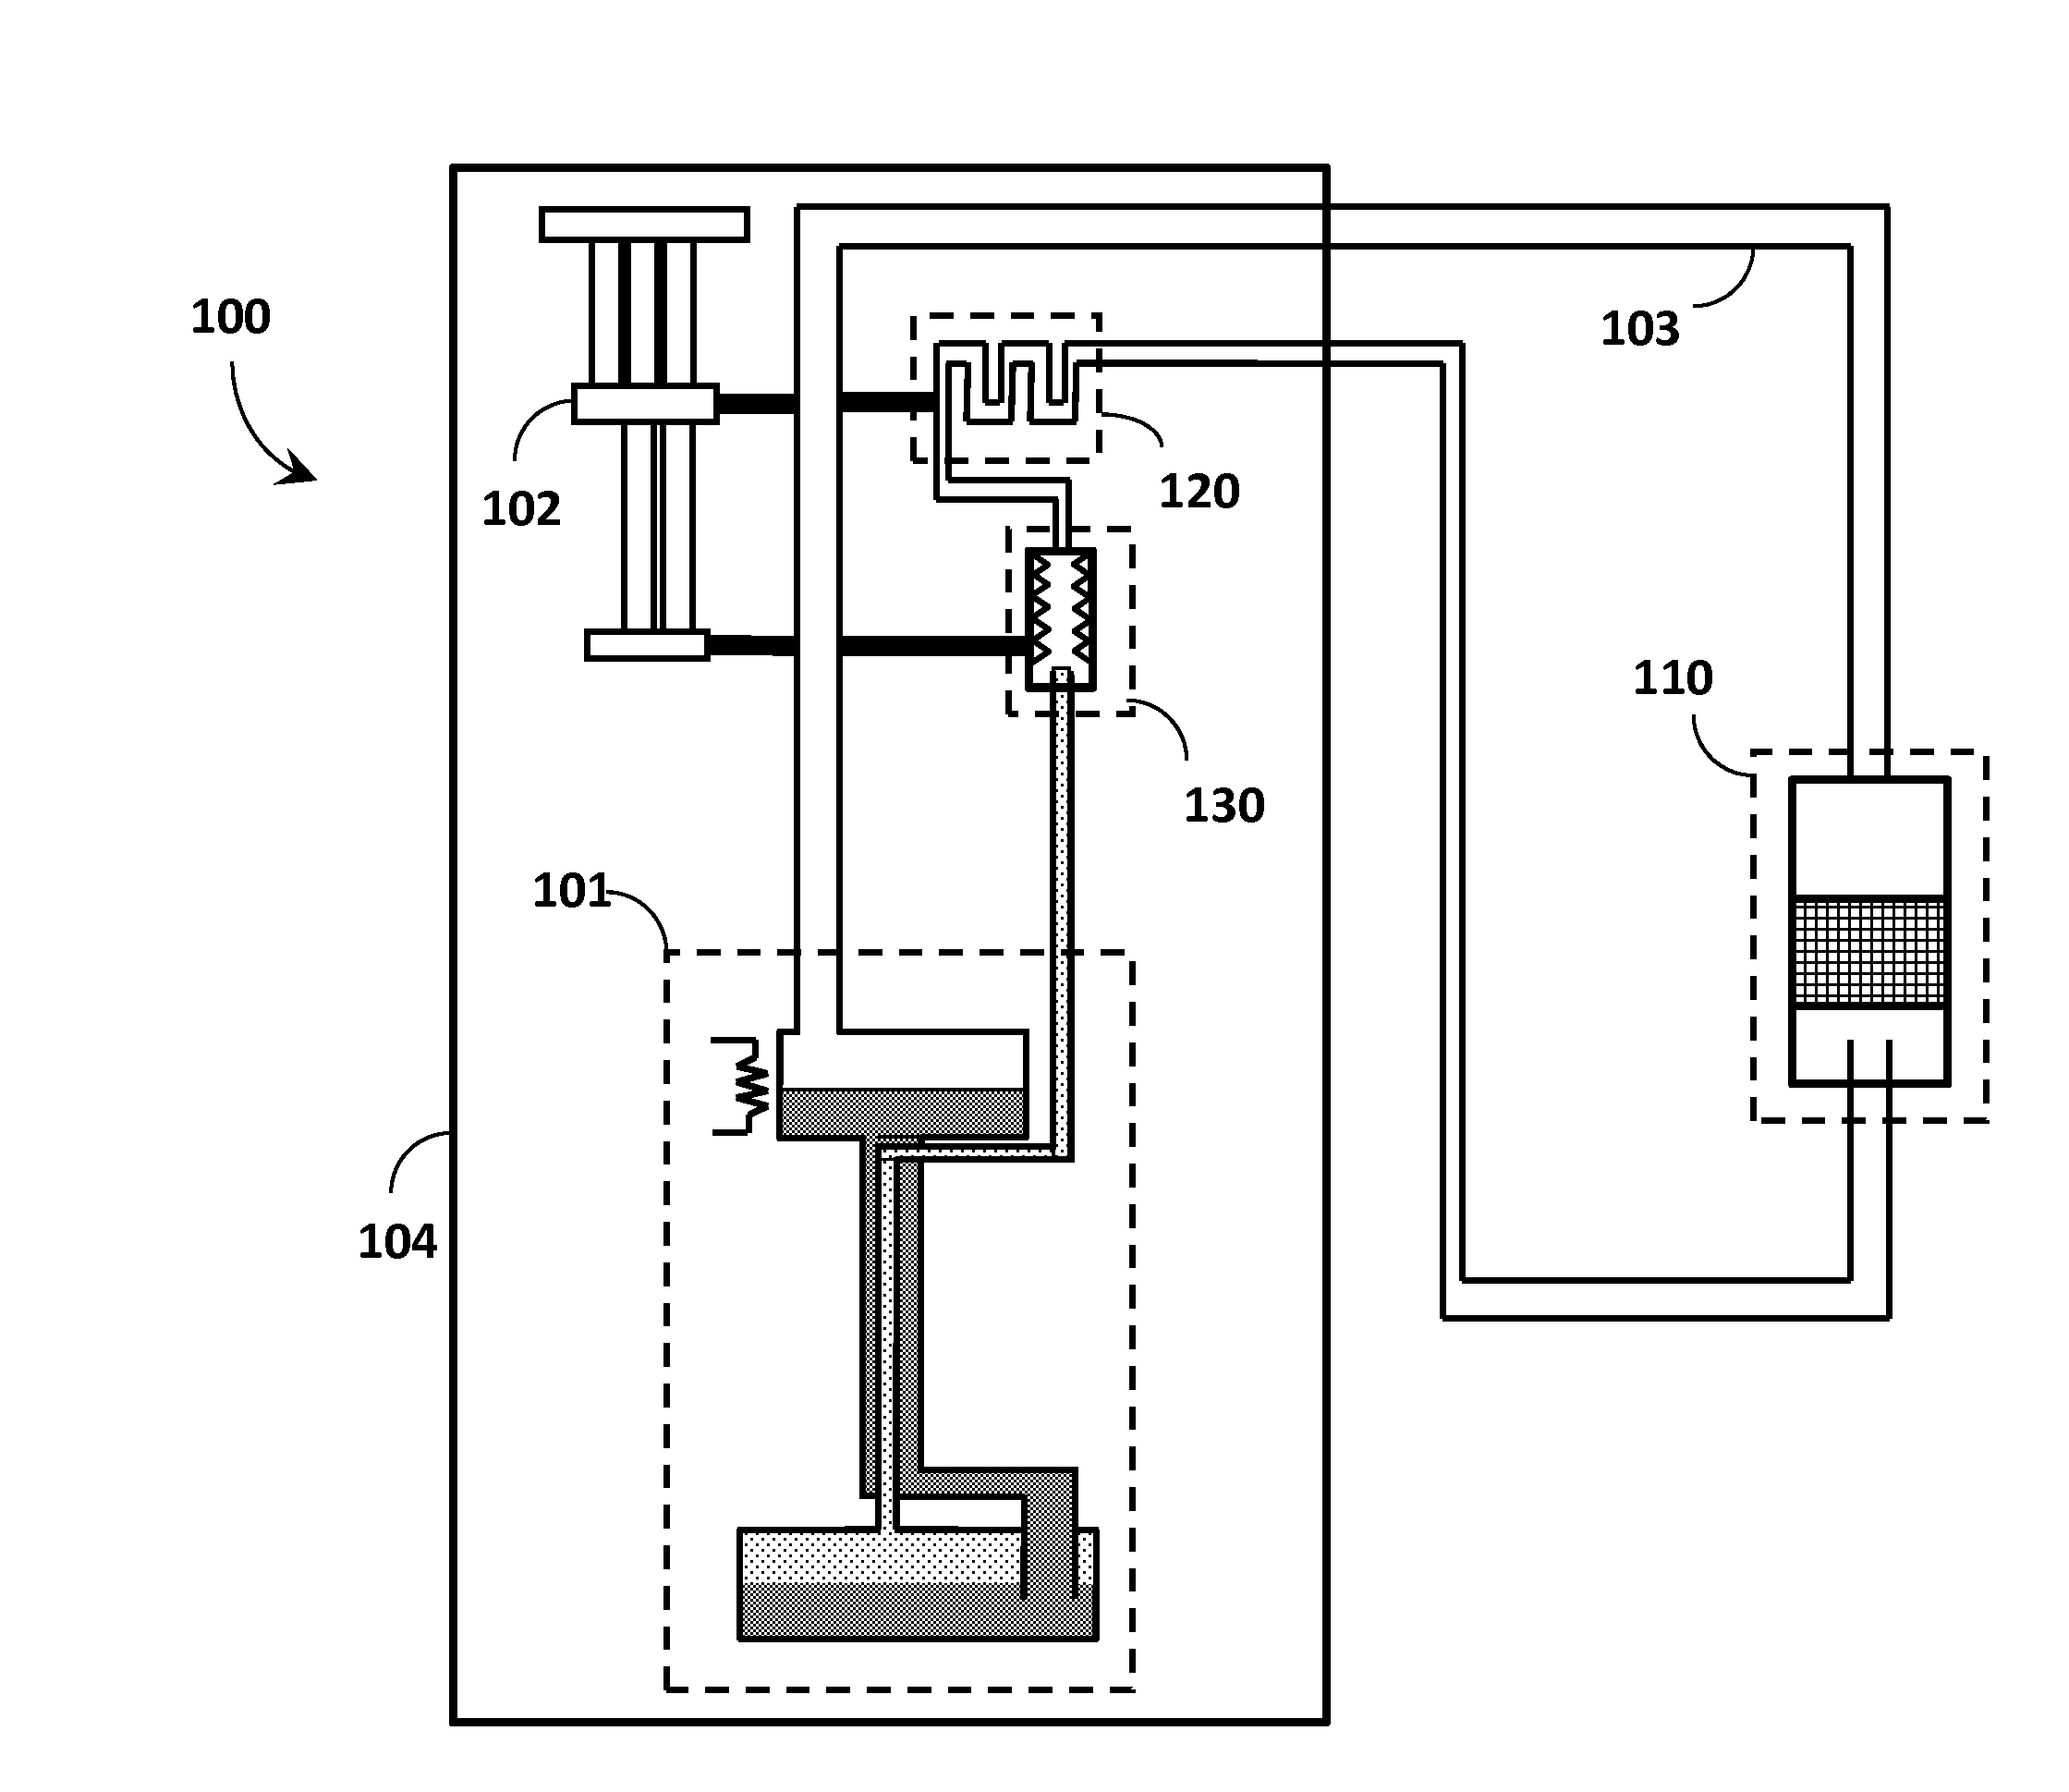 Systems and methods for cryogenic refrigeration